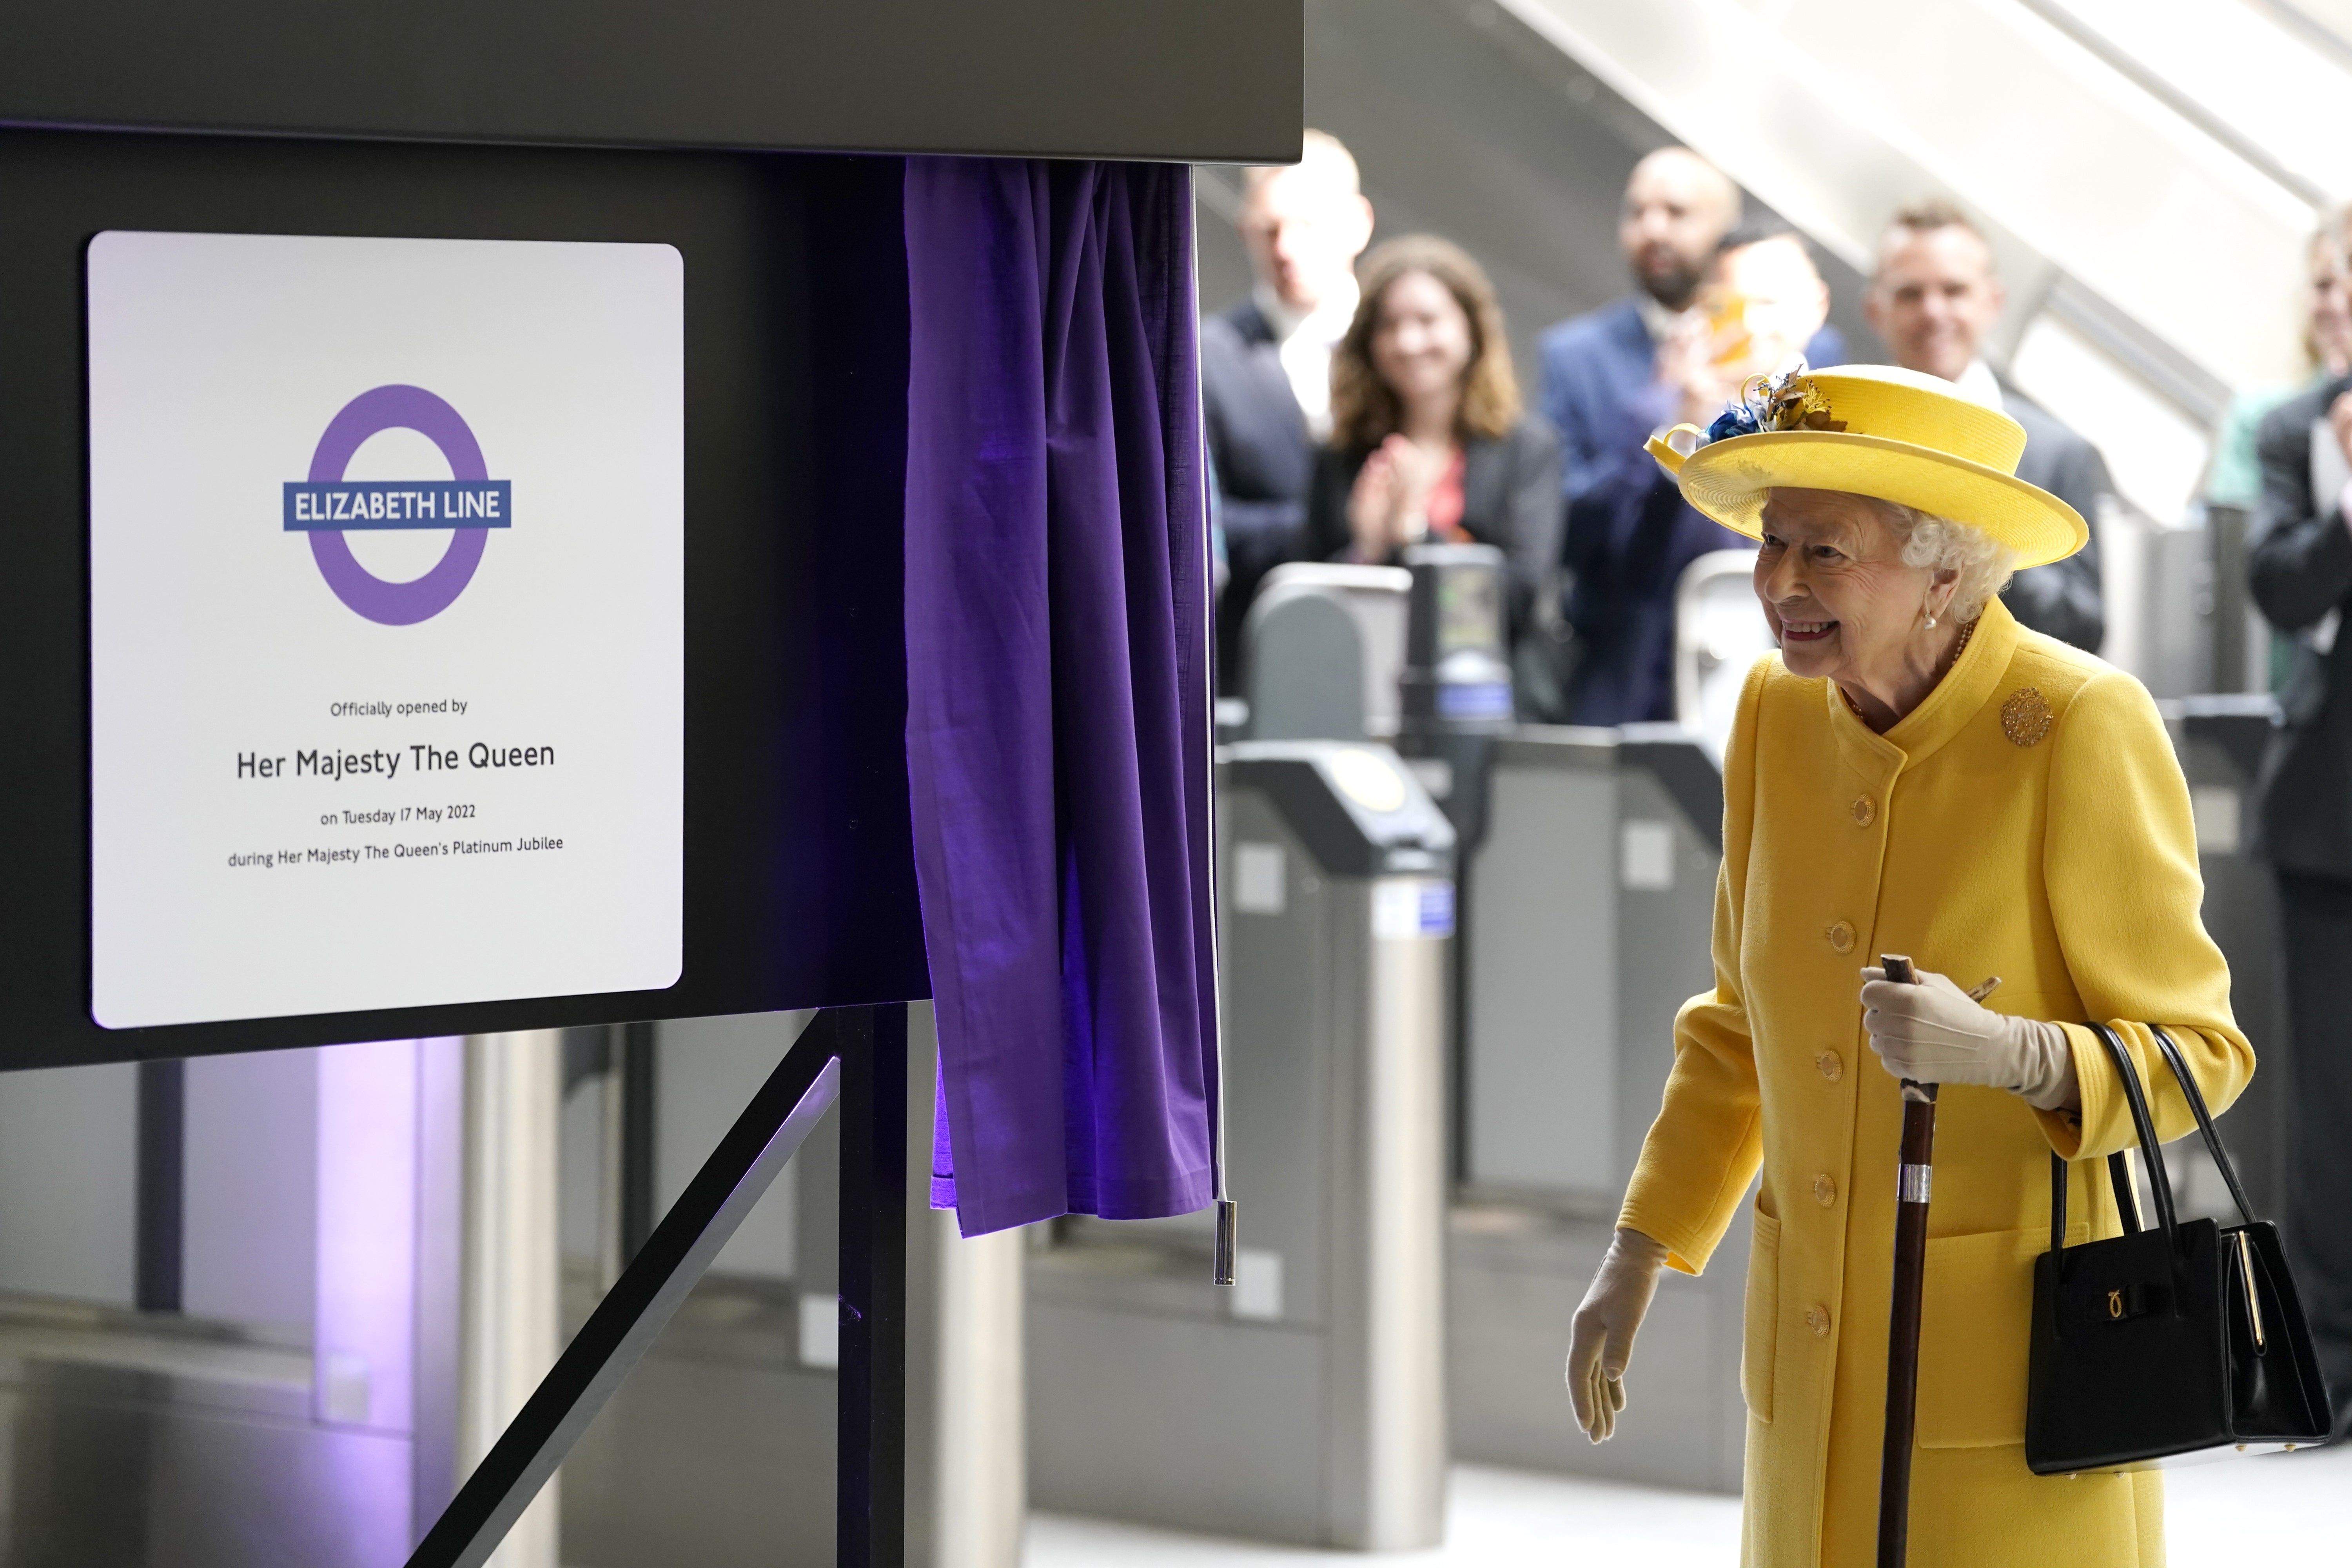 Queen Elizabeth II unveils a plaque to mark the Elizabeth line’s official opening at Paddington station in London (Andrew Matthews/PA)